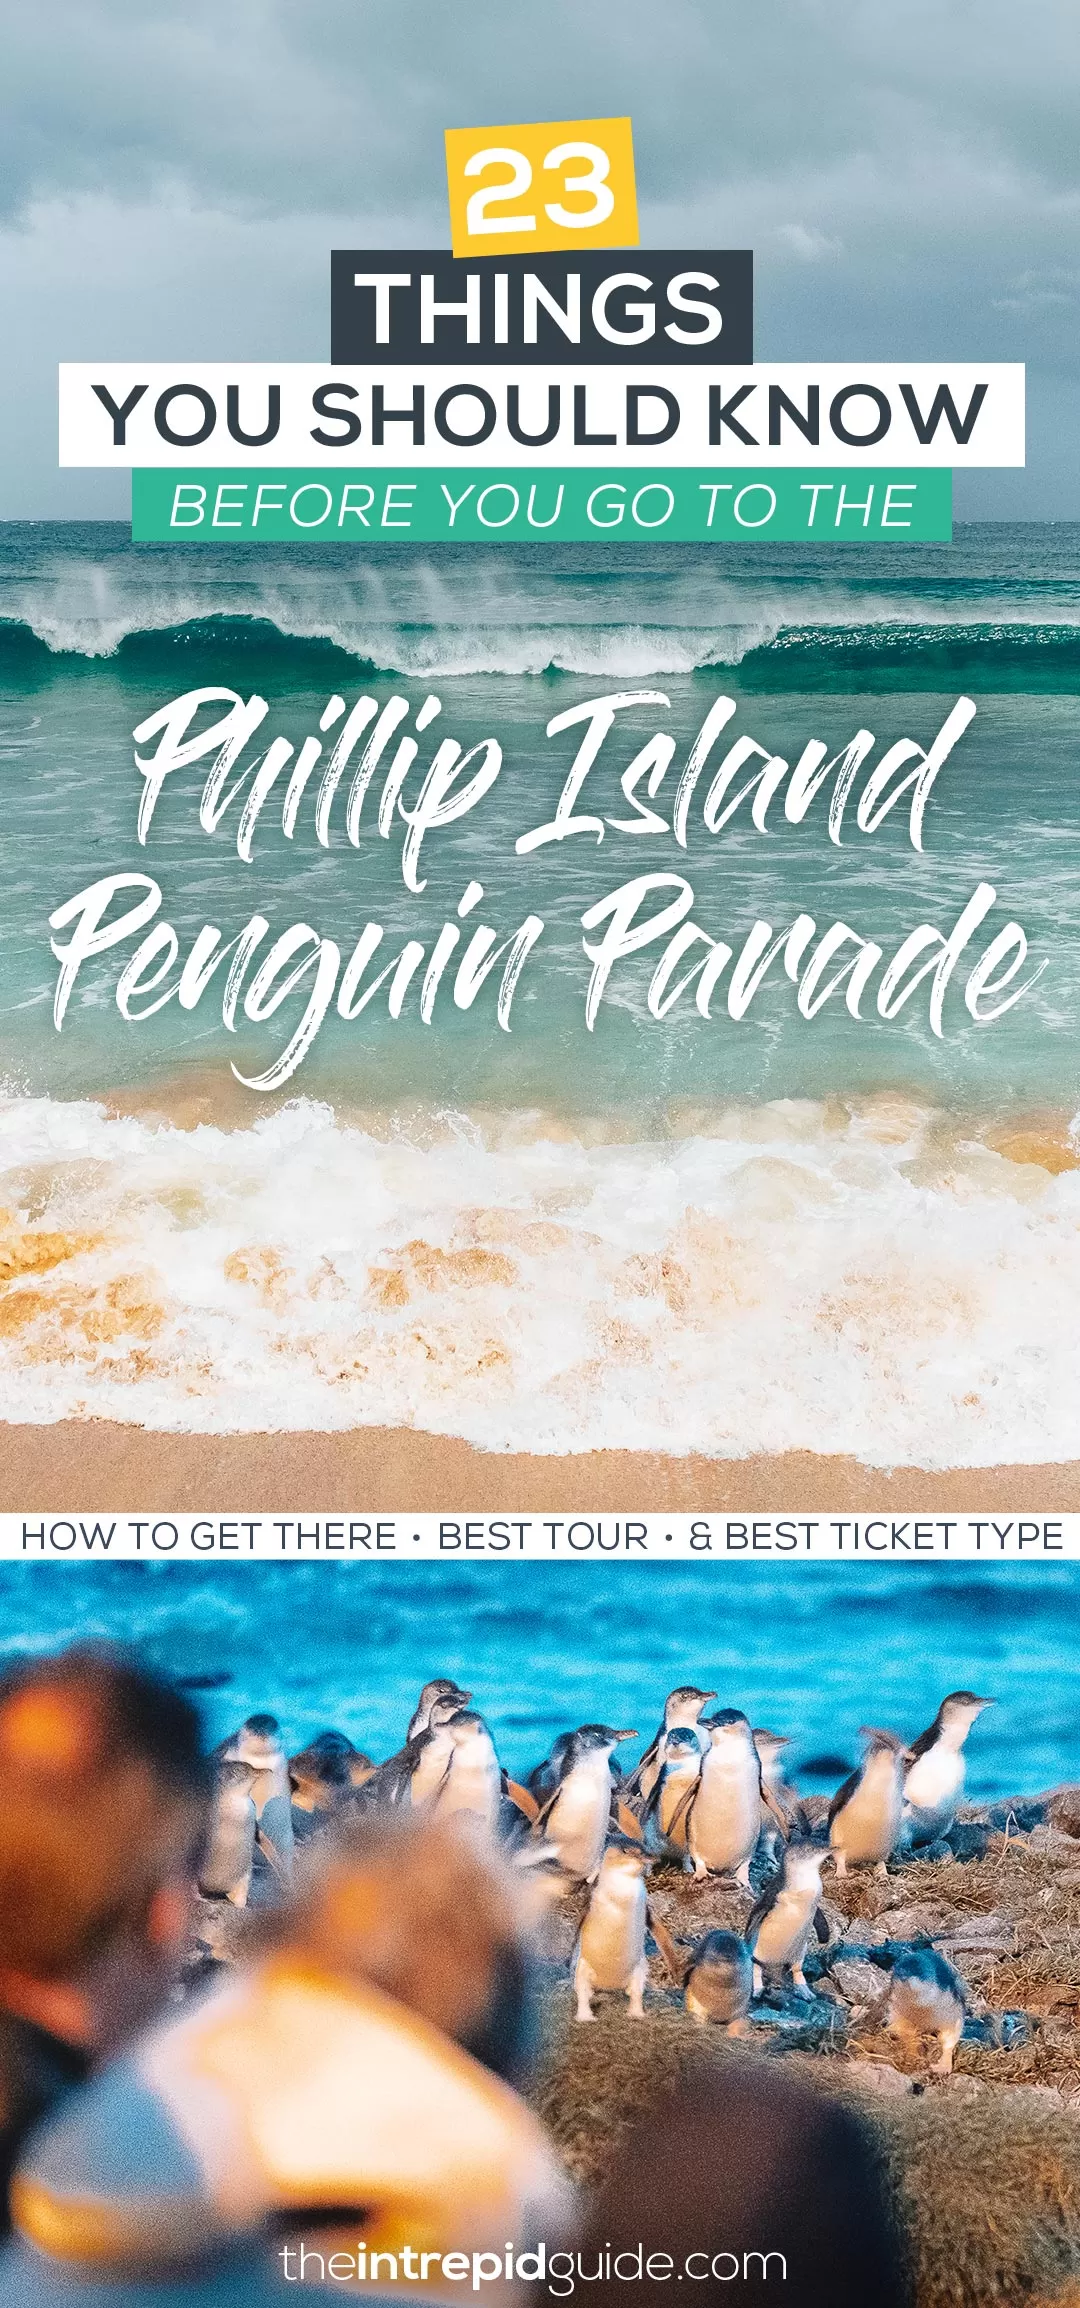 Phillip Island Penguin Parade Tour - 23 Things You Should Know